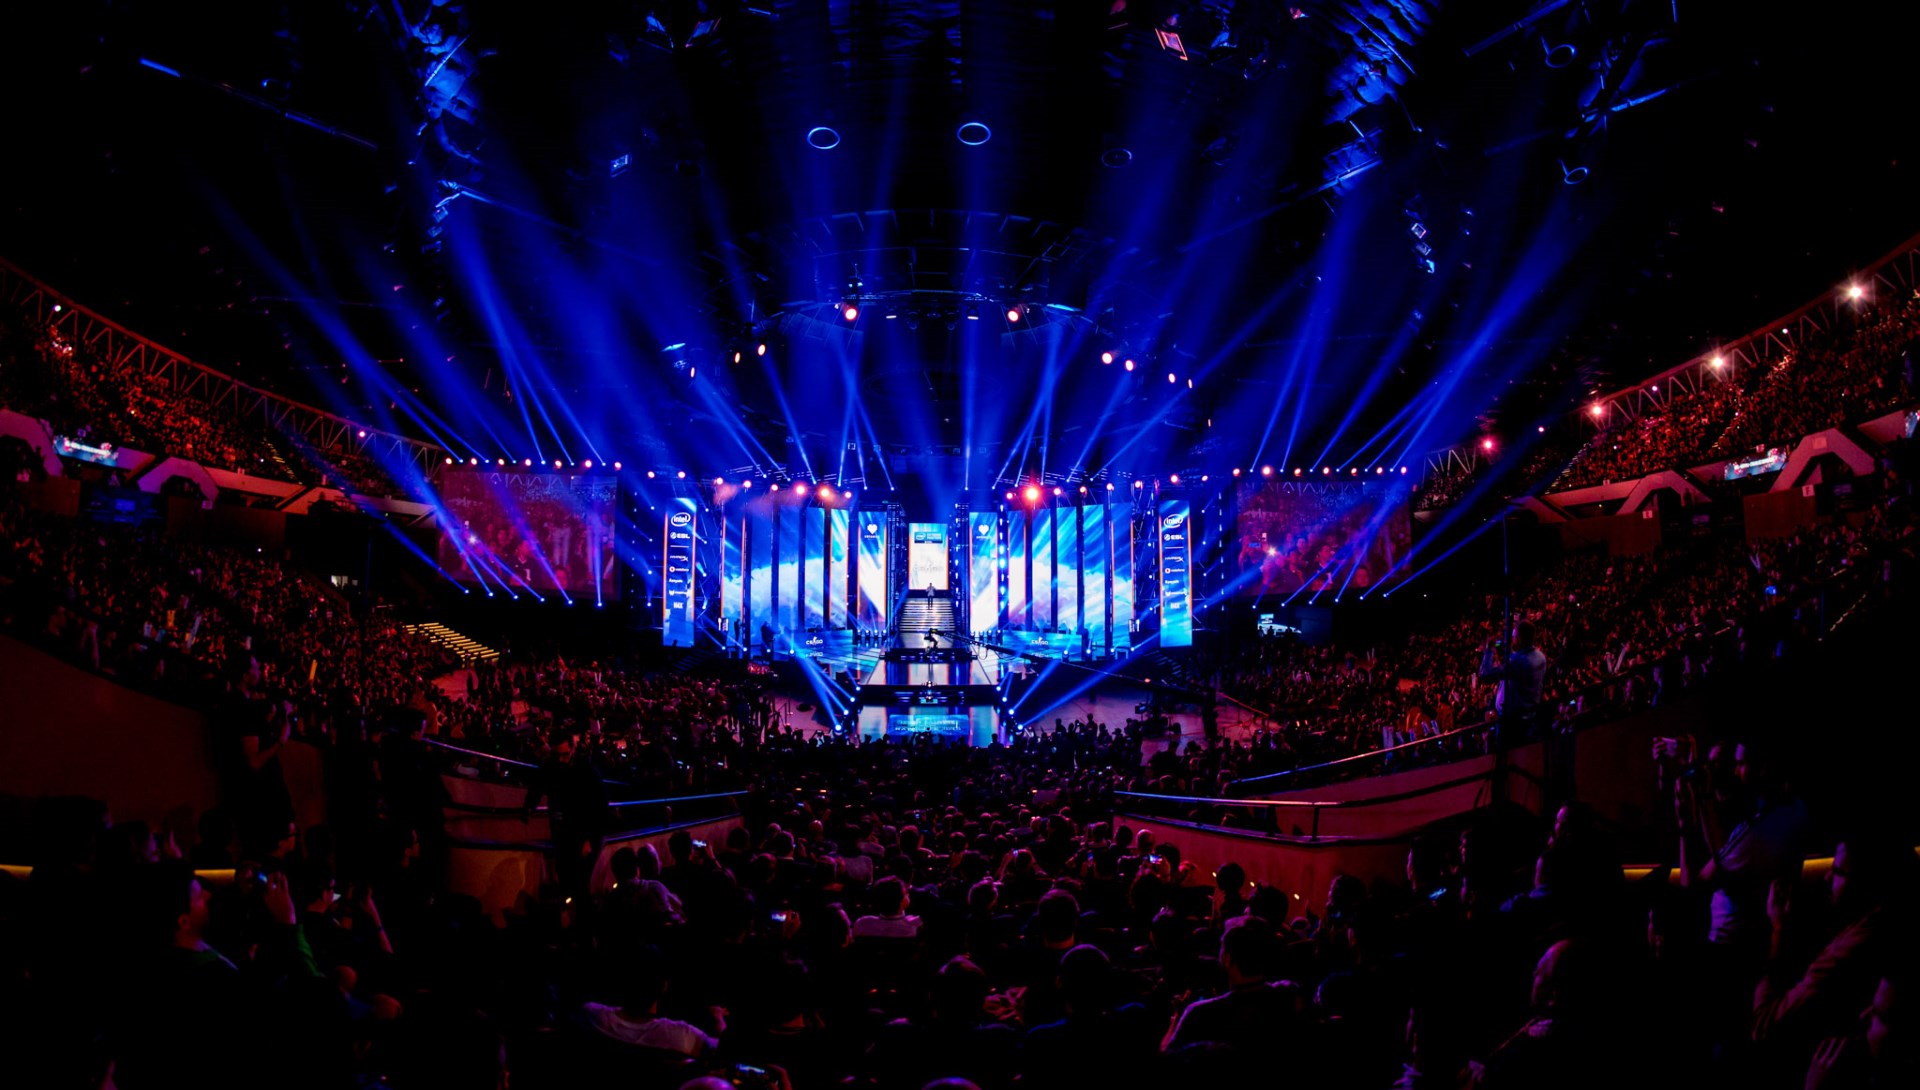 esl will hold its first ever fortnite tournament at iem katowice 2019 pc gamer - esl fortnite teams